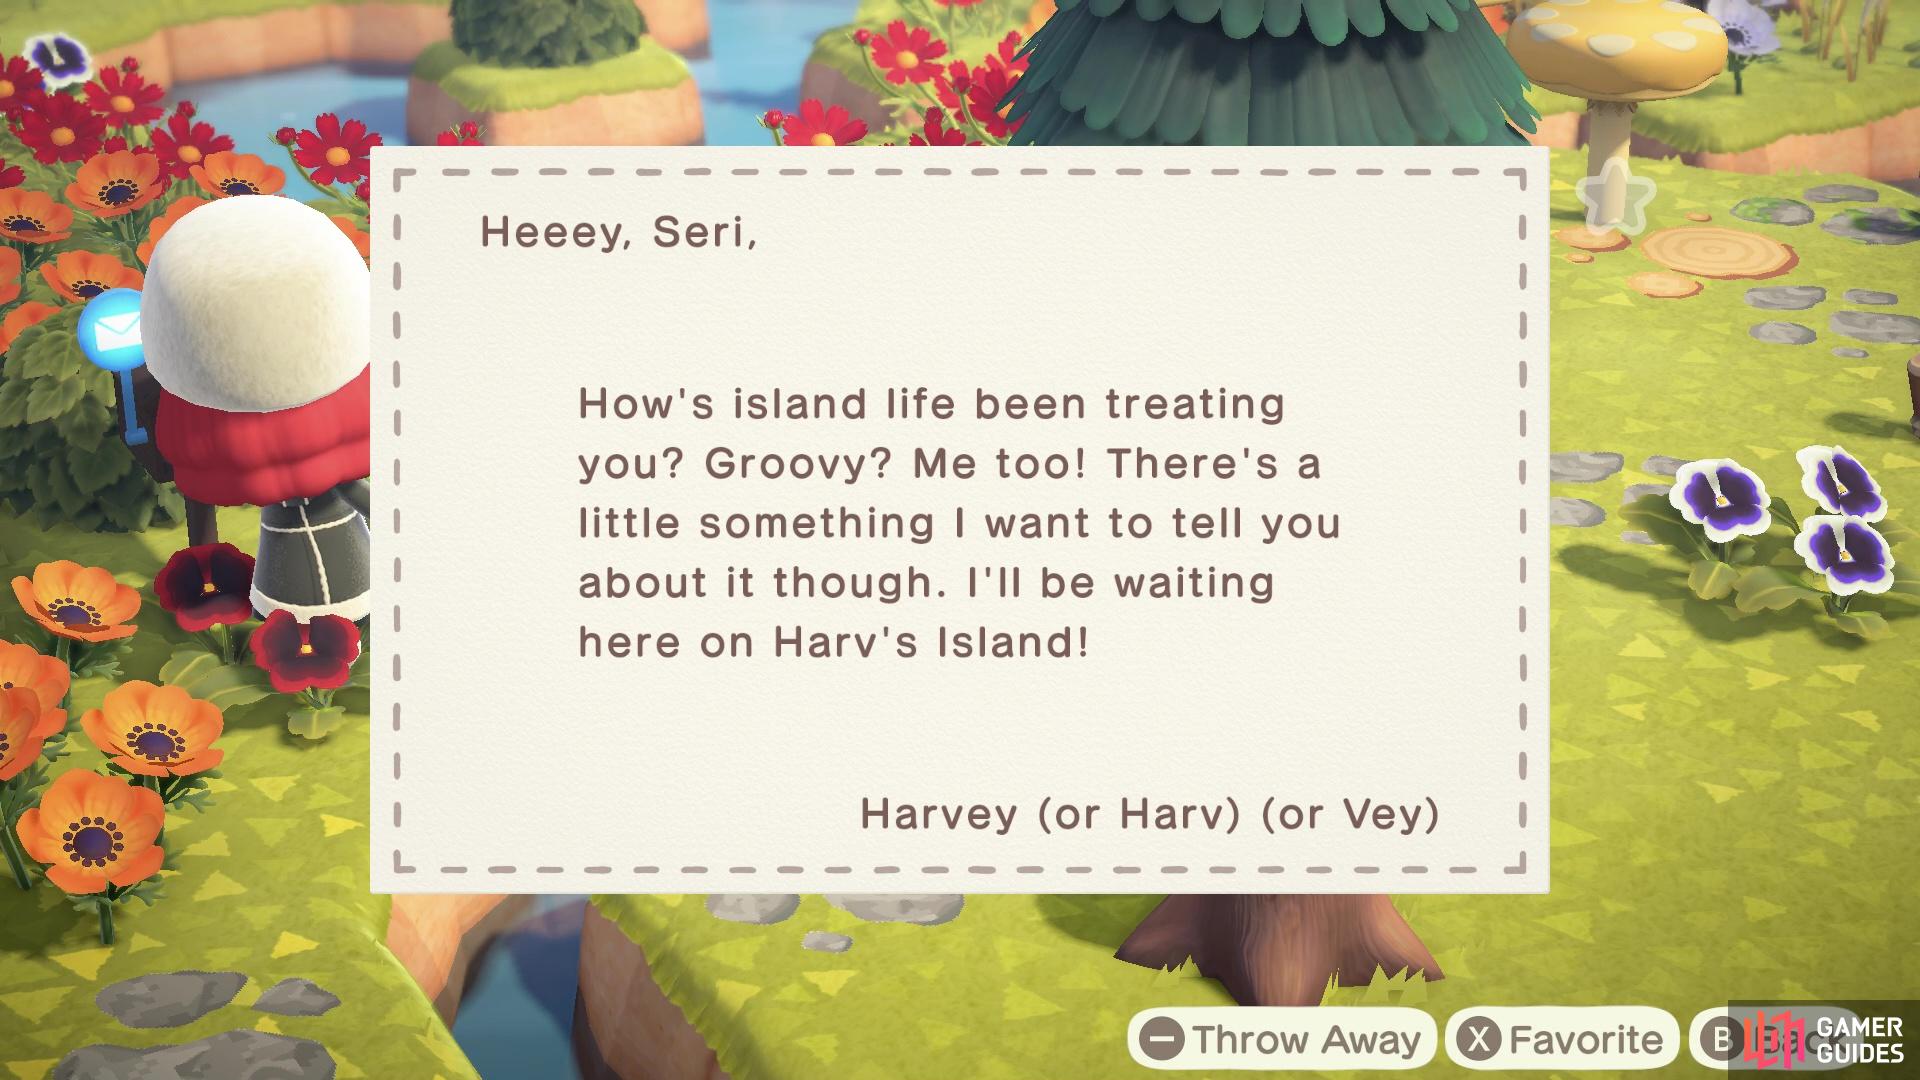 You've been summoned to Harv's Island!